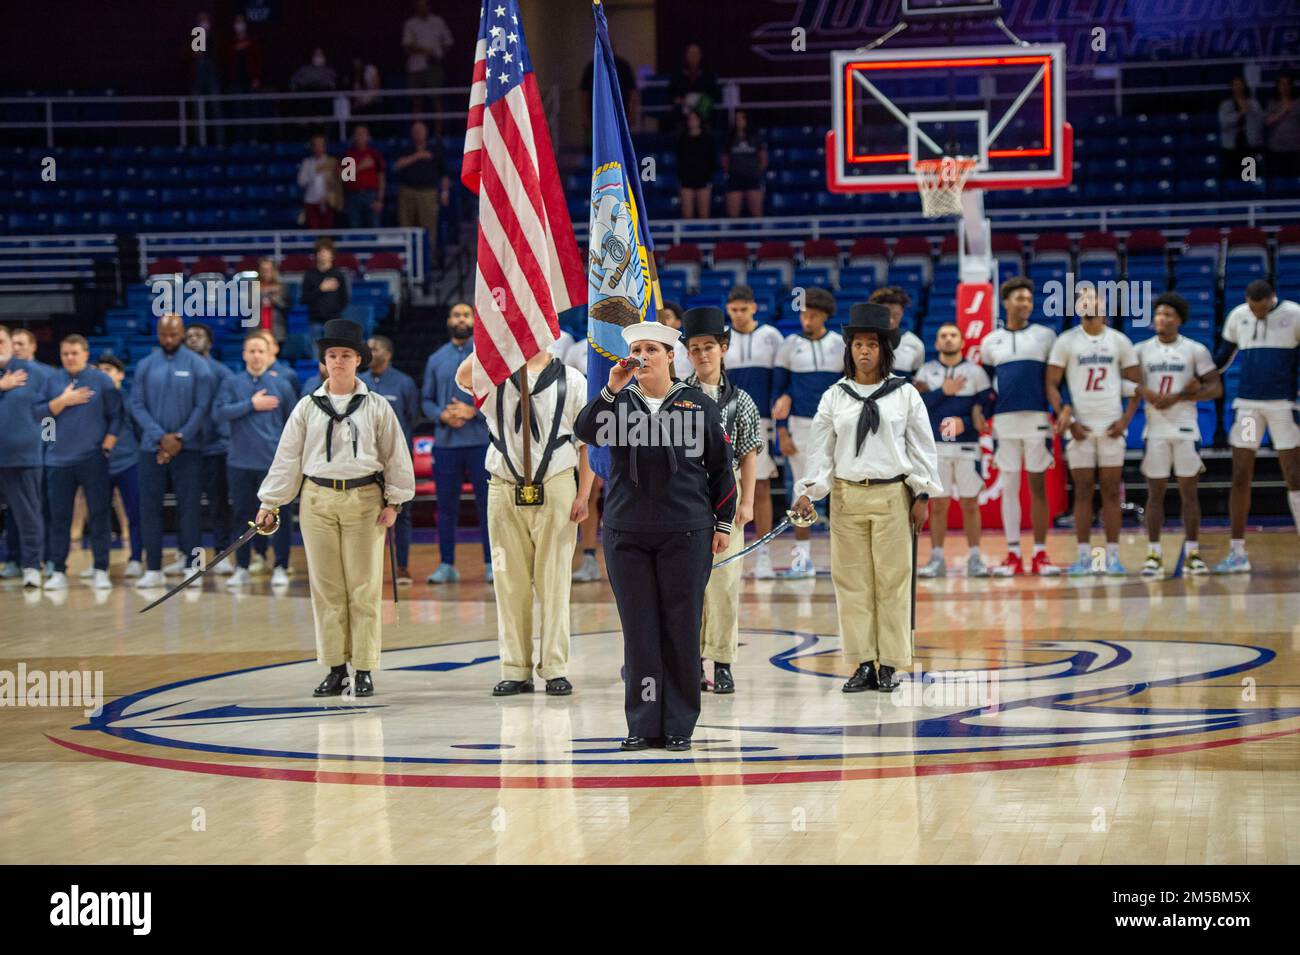 BOSTON (Feb 23, 2022 ) Sailors assigned to USS Constitution perform a color guard at the University of Southern Alabama basketball game as part of the Mobile Navy Week. USS Constitution, is the world’s oldest commissioned warship afloat, and played a crucial role in the Barbary Wars and the War of 1812, actively defending sea lanes from 1797 to 1855. During normal operations, the active-duty Sailors stationed aboard USS Constitution provide free tours and offer public visitation to more than 600,000 people a year as they support the ship’s mission of promoting the Navy’s history and maritime h Stock Photo